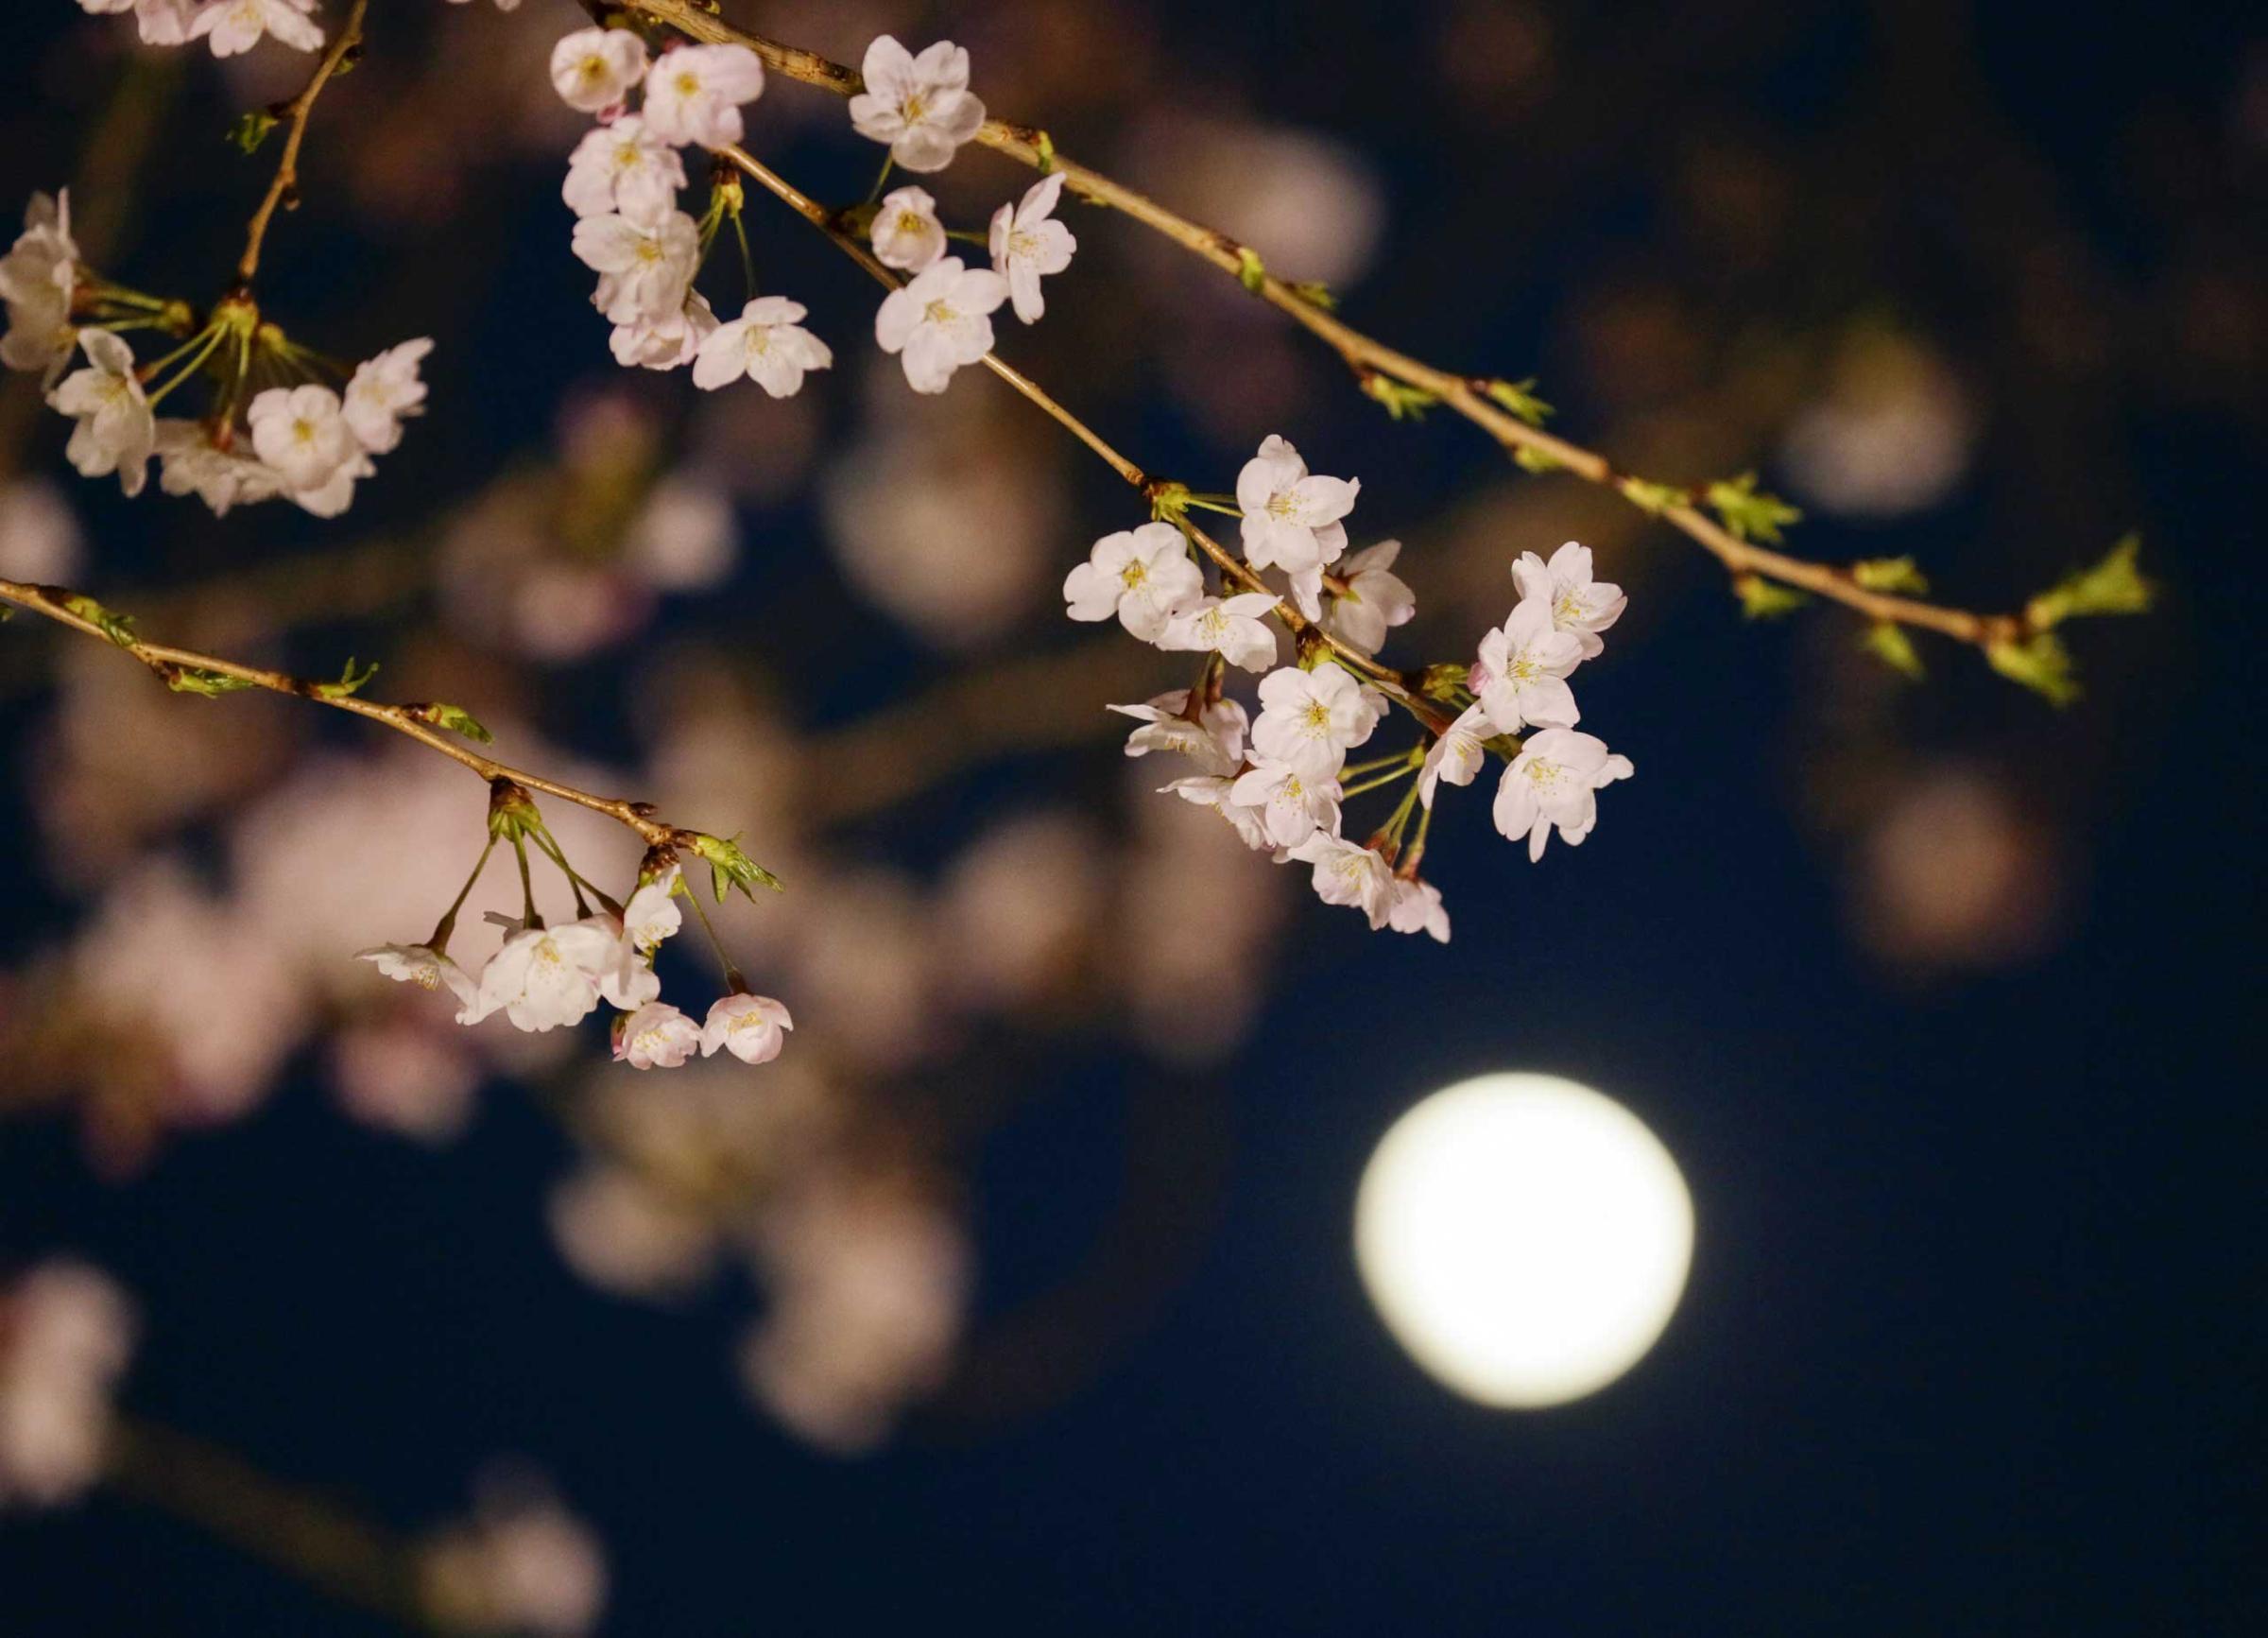 Cherry blossoms in full bloom are seen under the moon in waxing gibbous in Tokyo, March 30, 2015.